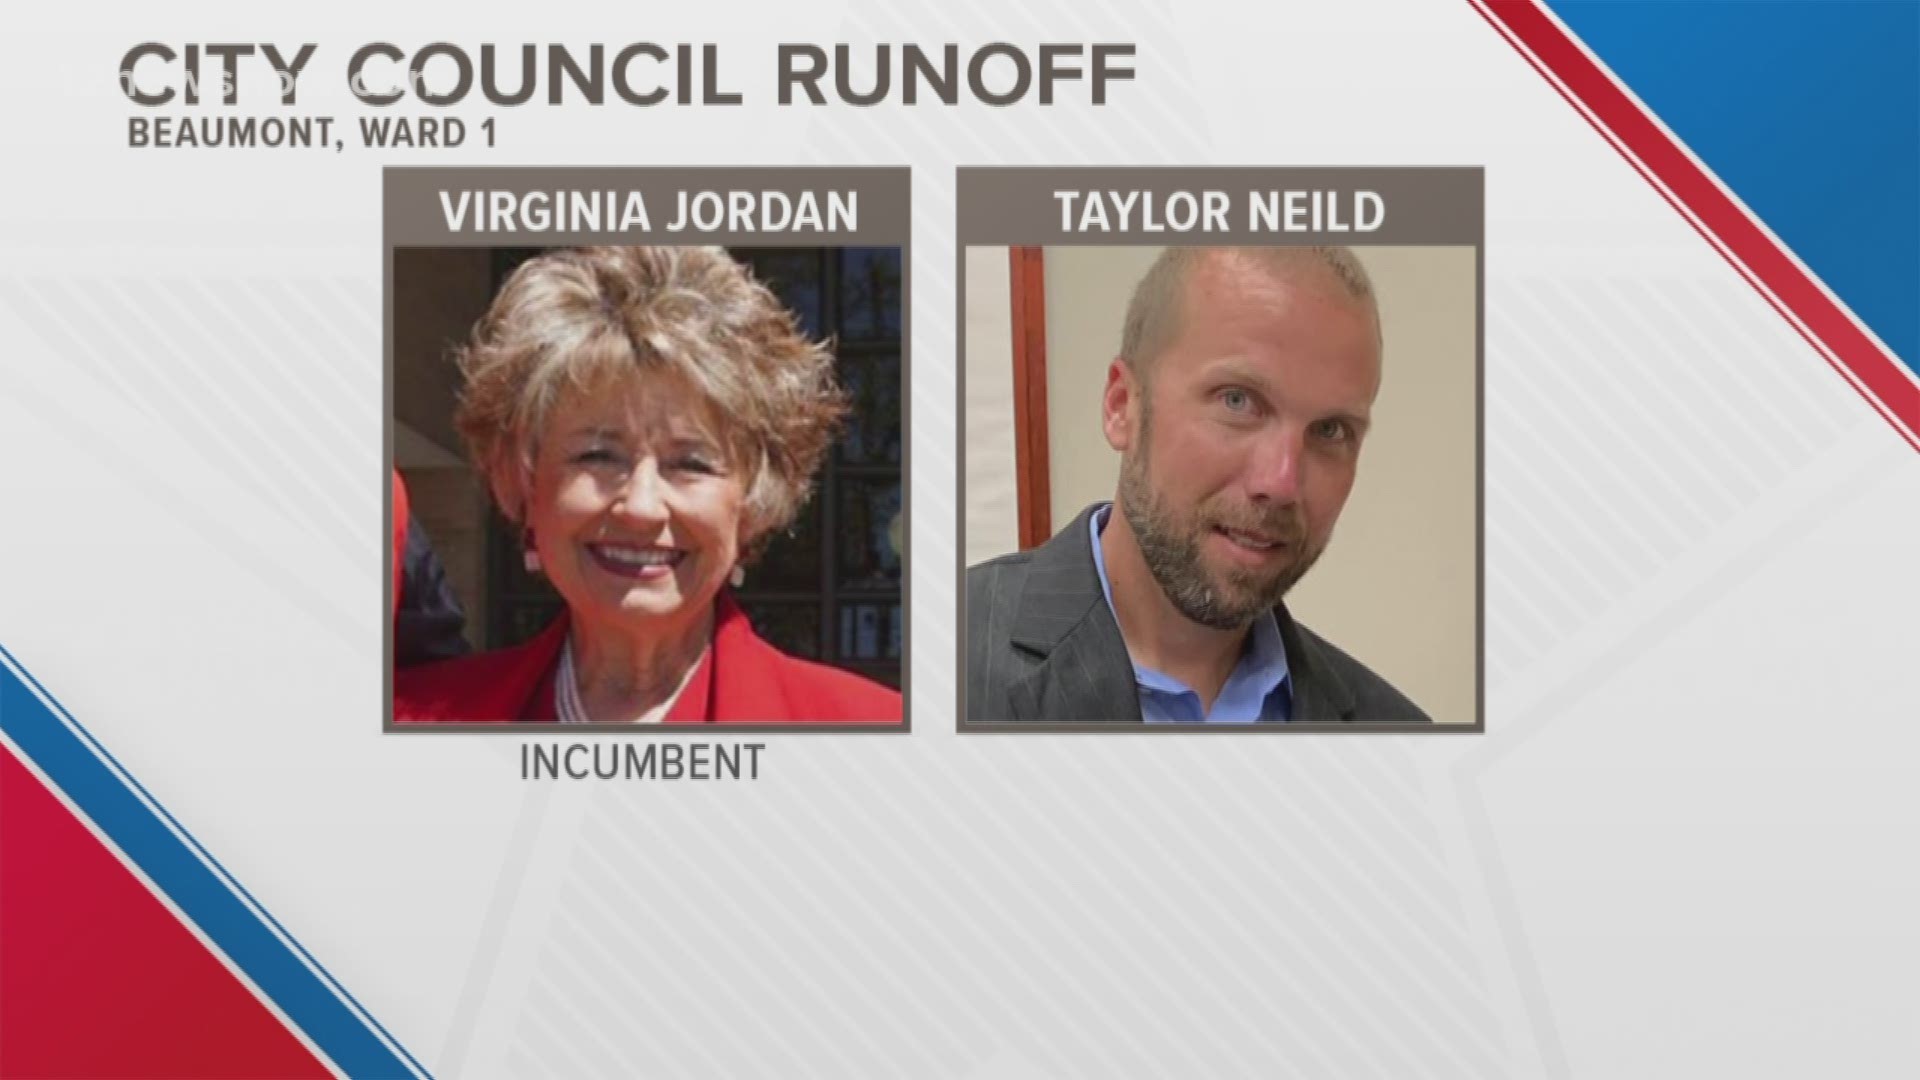 Voters will able to vote for either Virginia Jordan or Taylor Neild in the runoff.